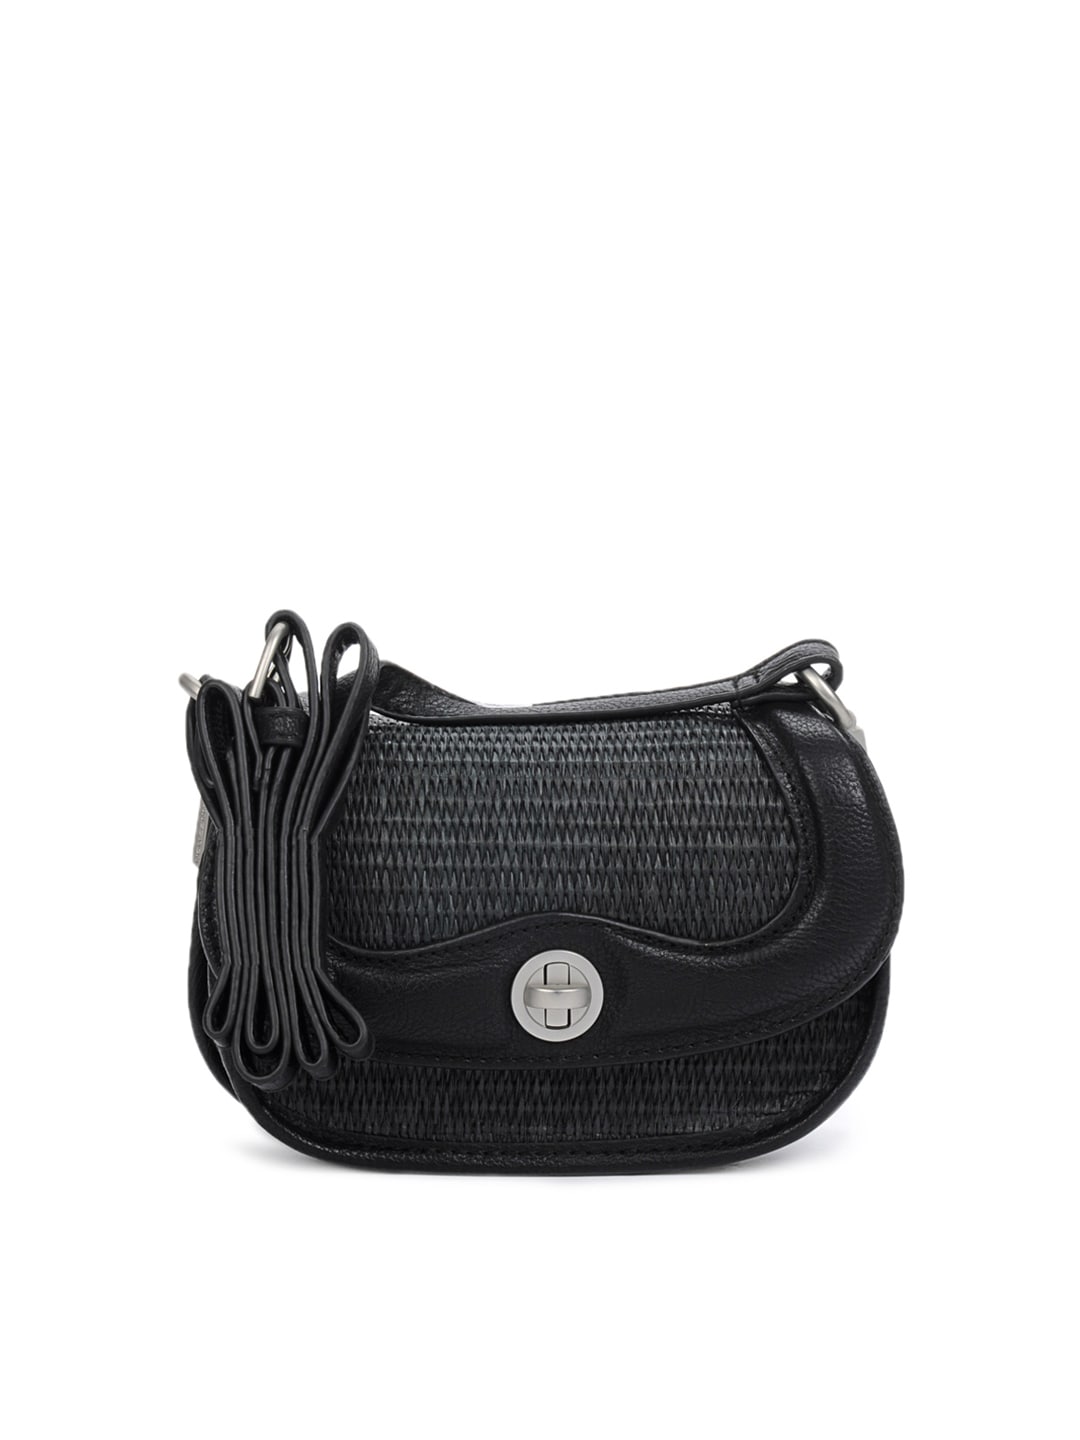 French Connection Women Black Sling Bag